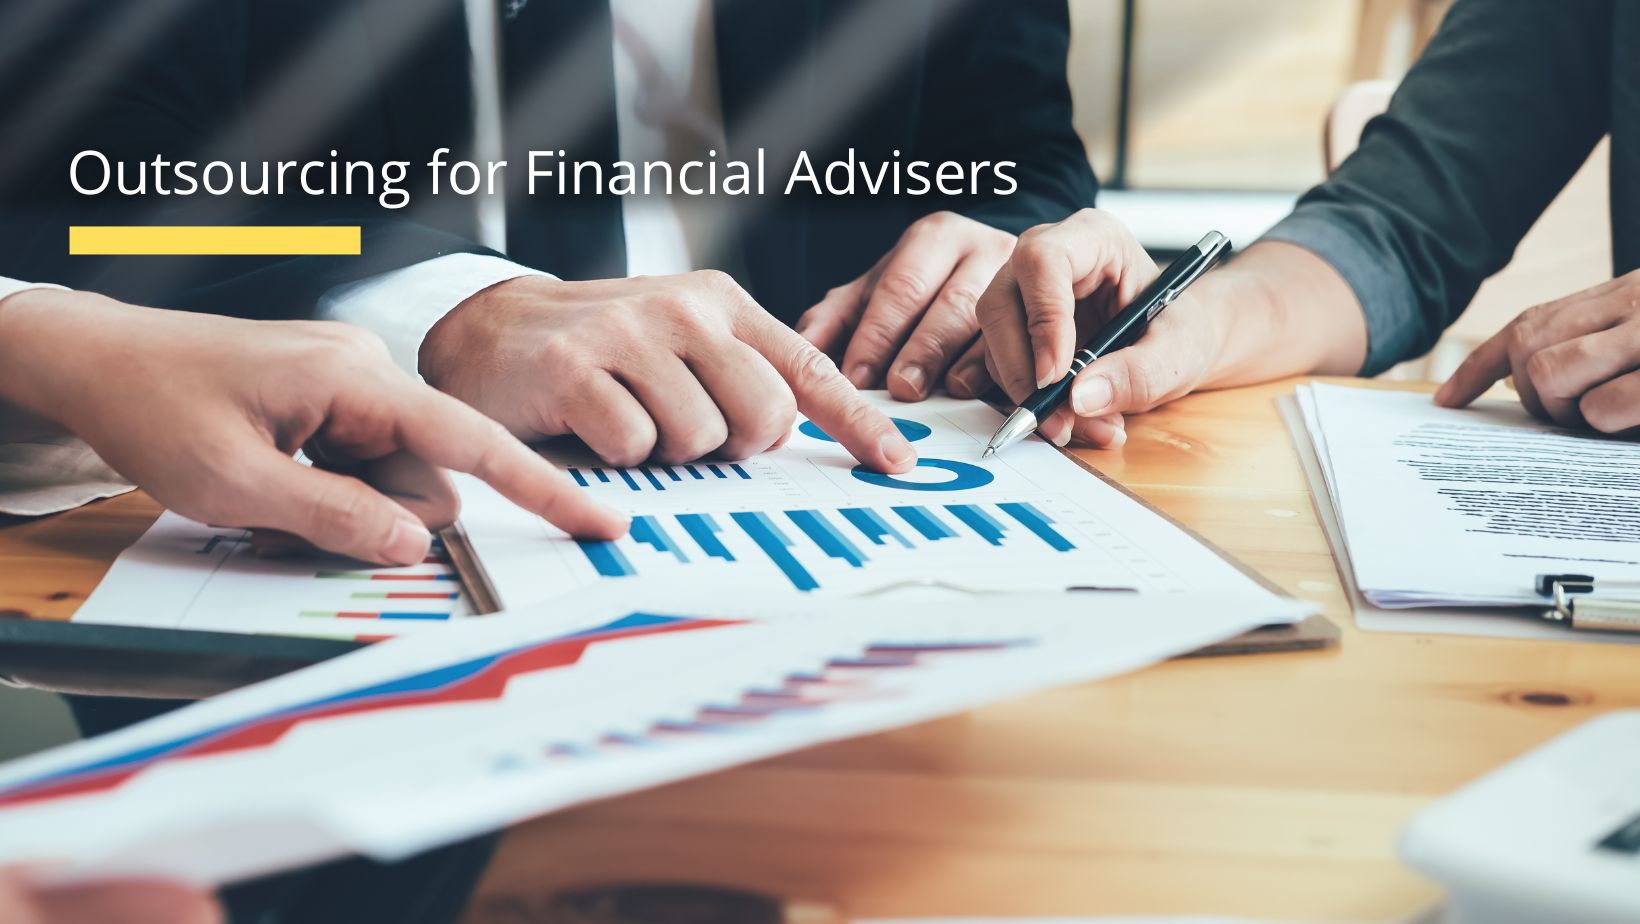 Outsourcing for Financial Advisers - Benefits and Solutions